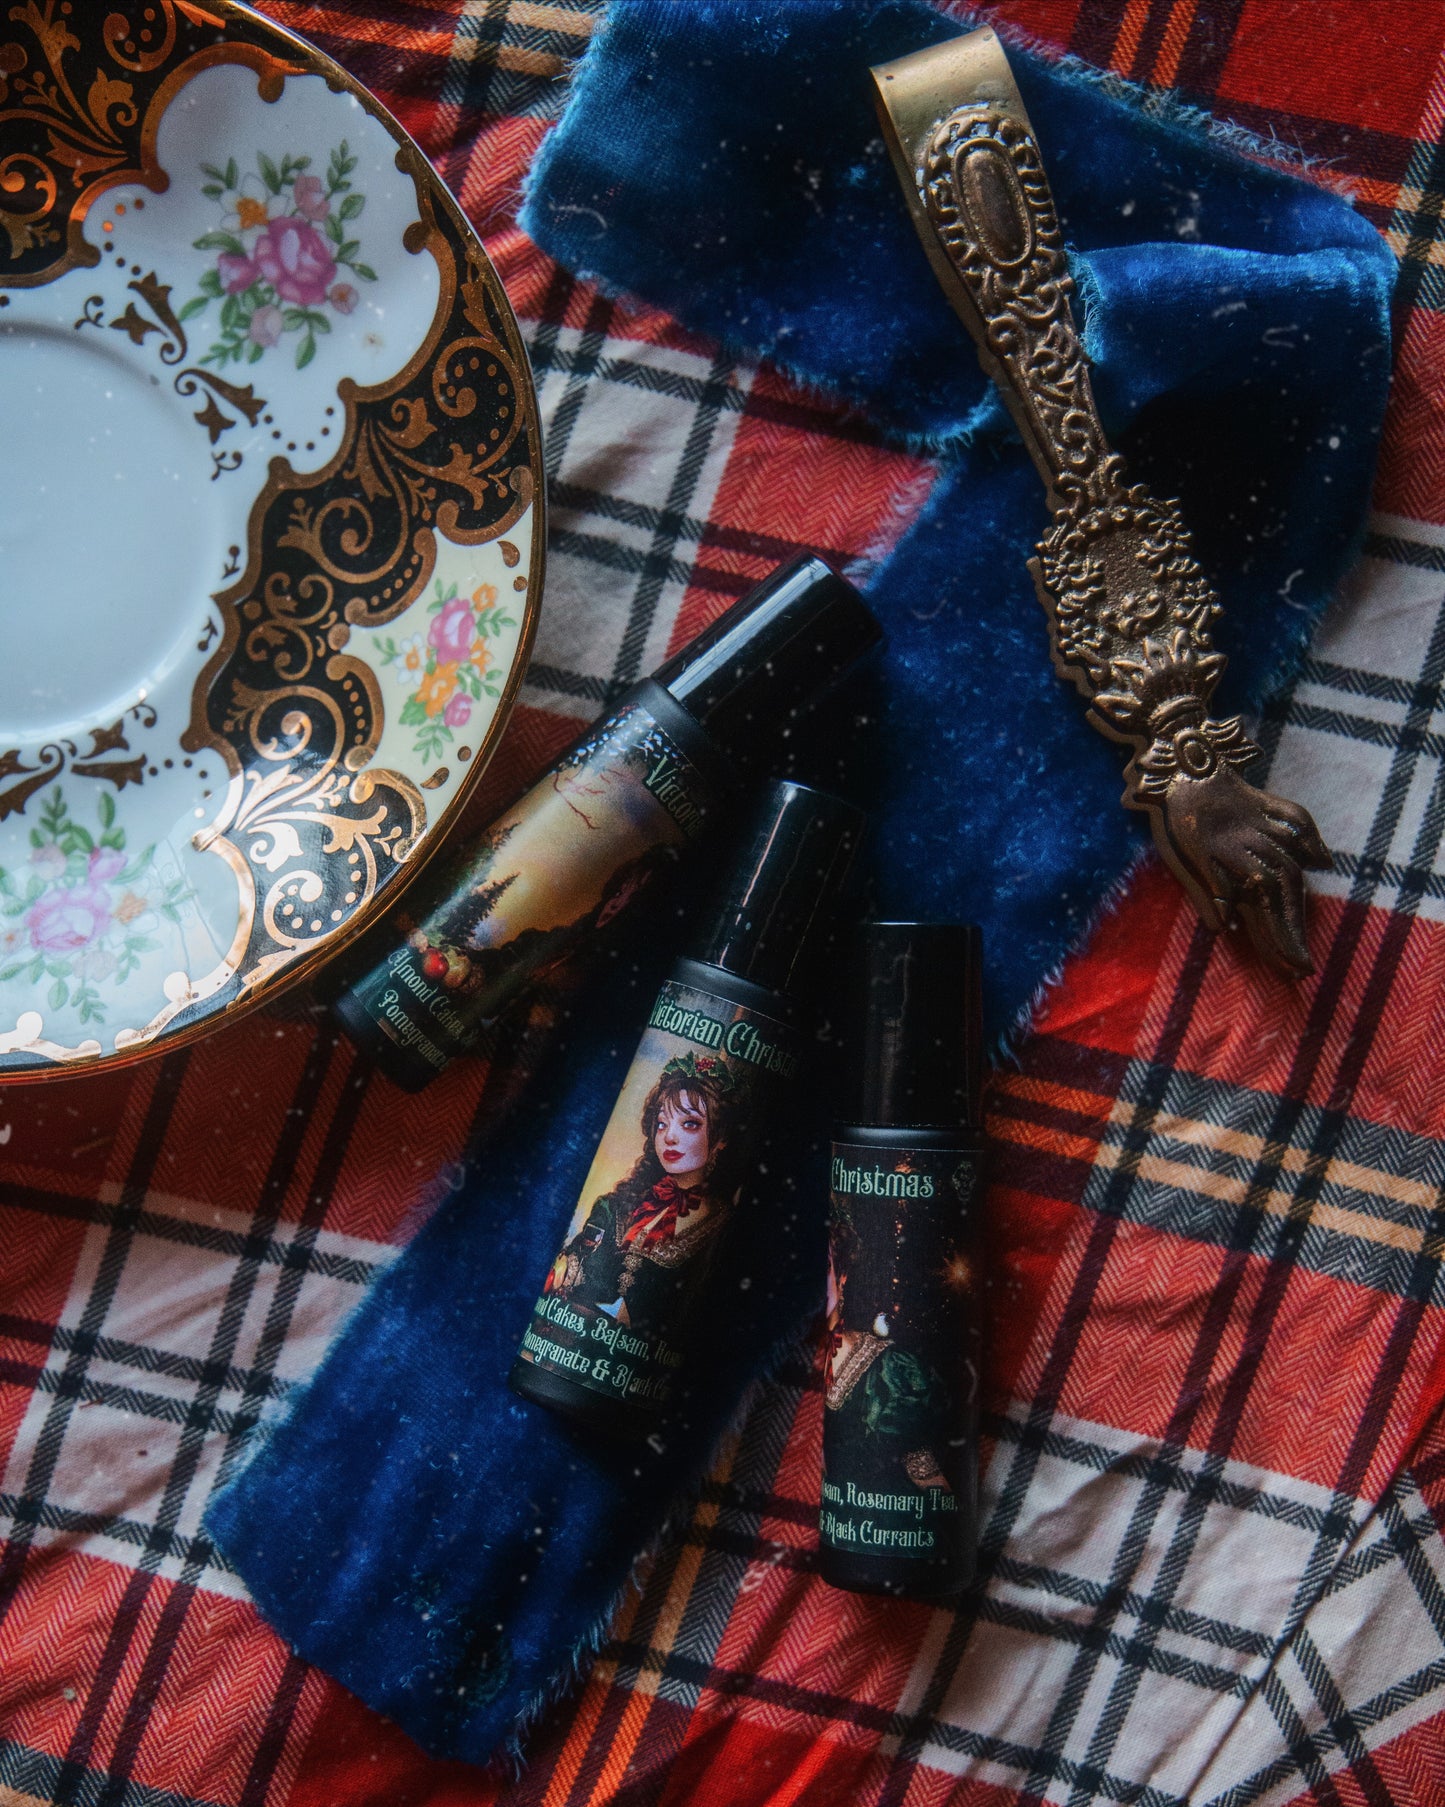 The “Victorian Christmas” Roll On Perfume